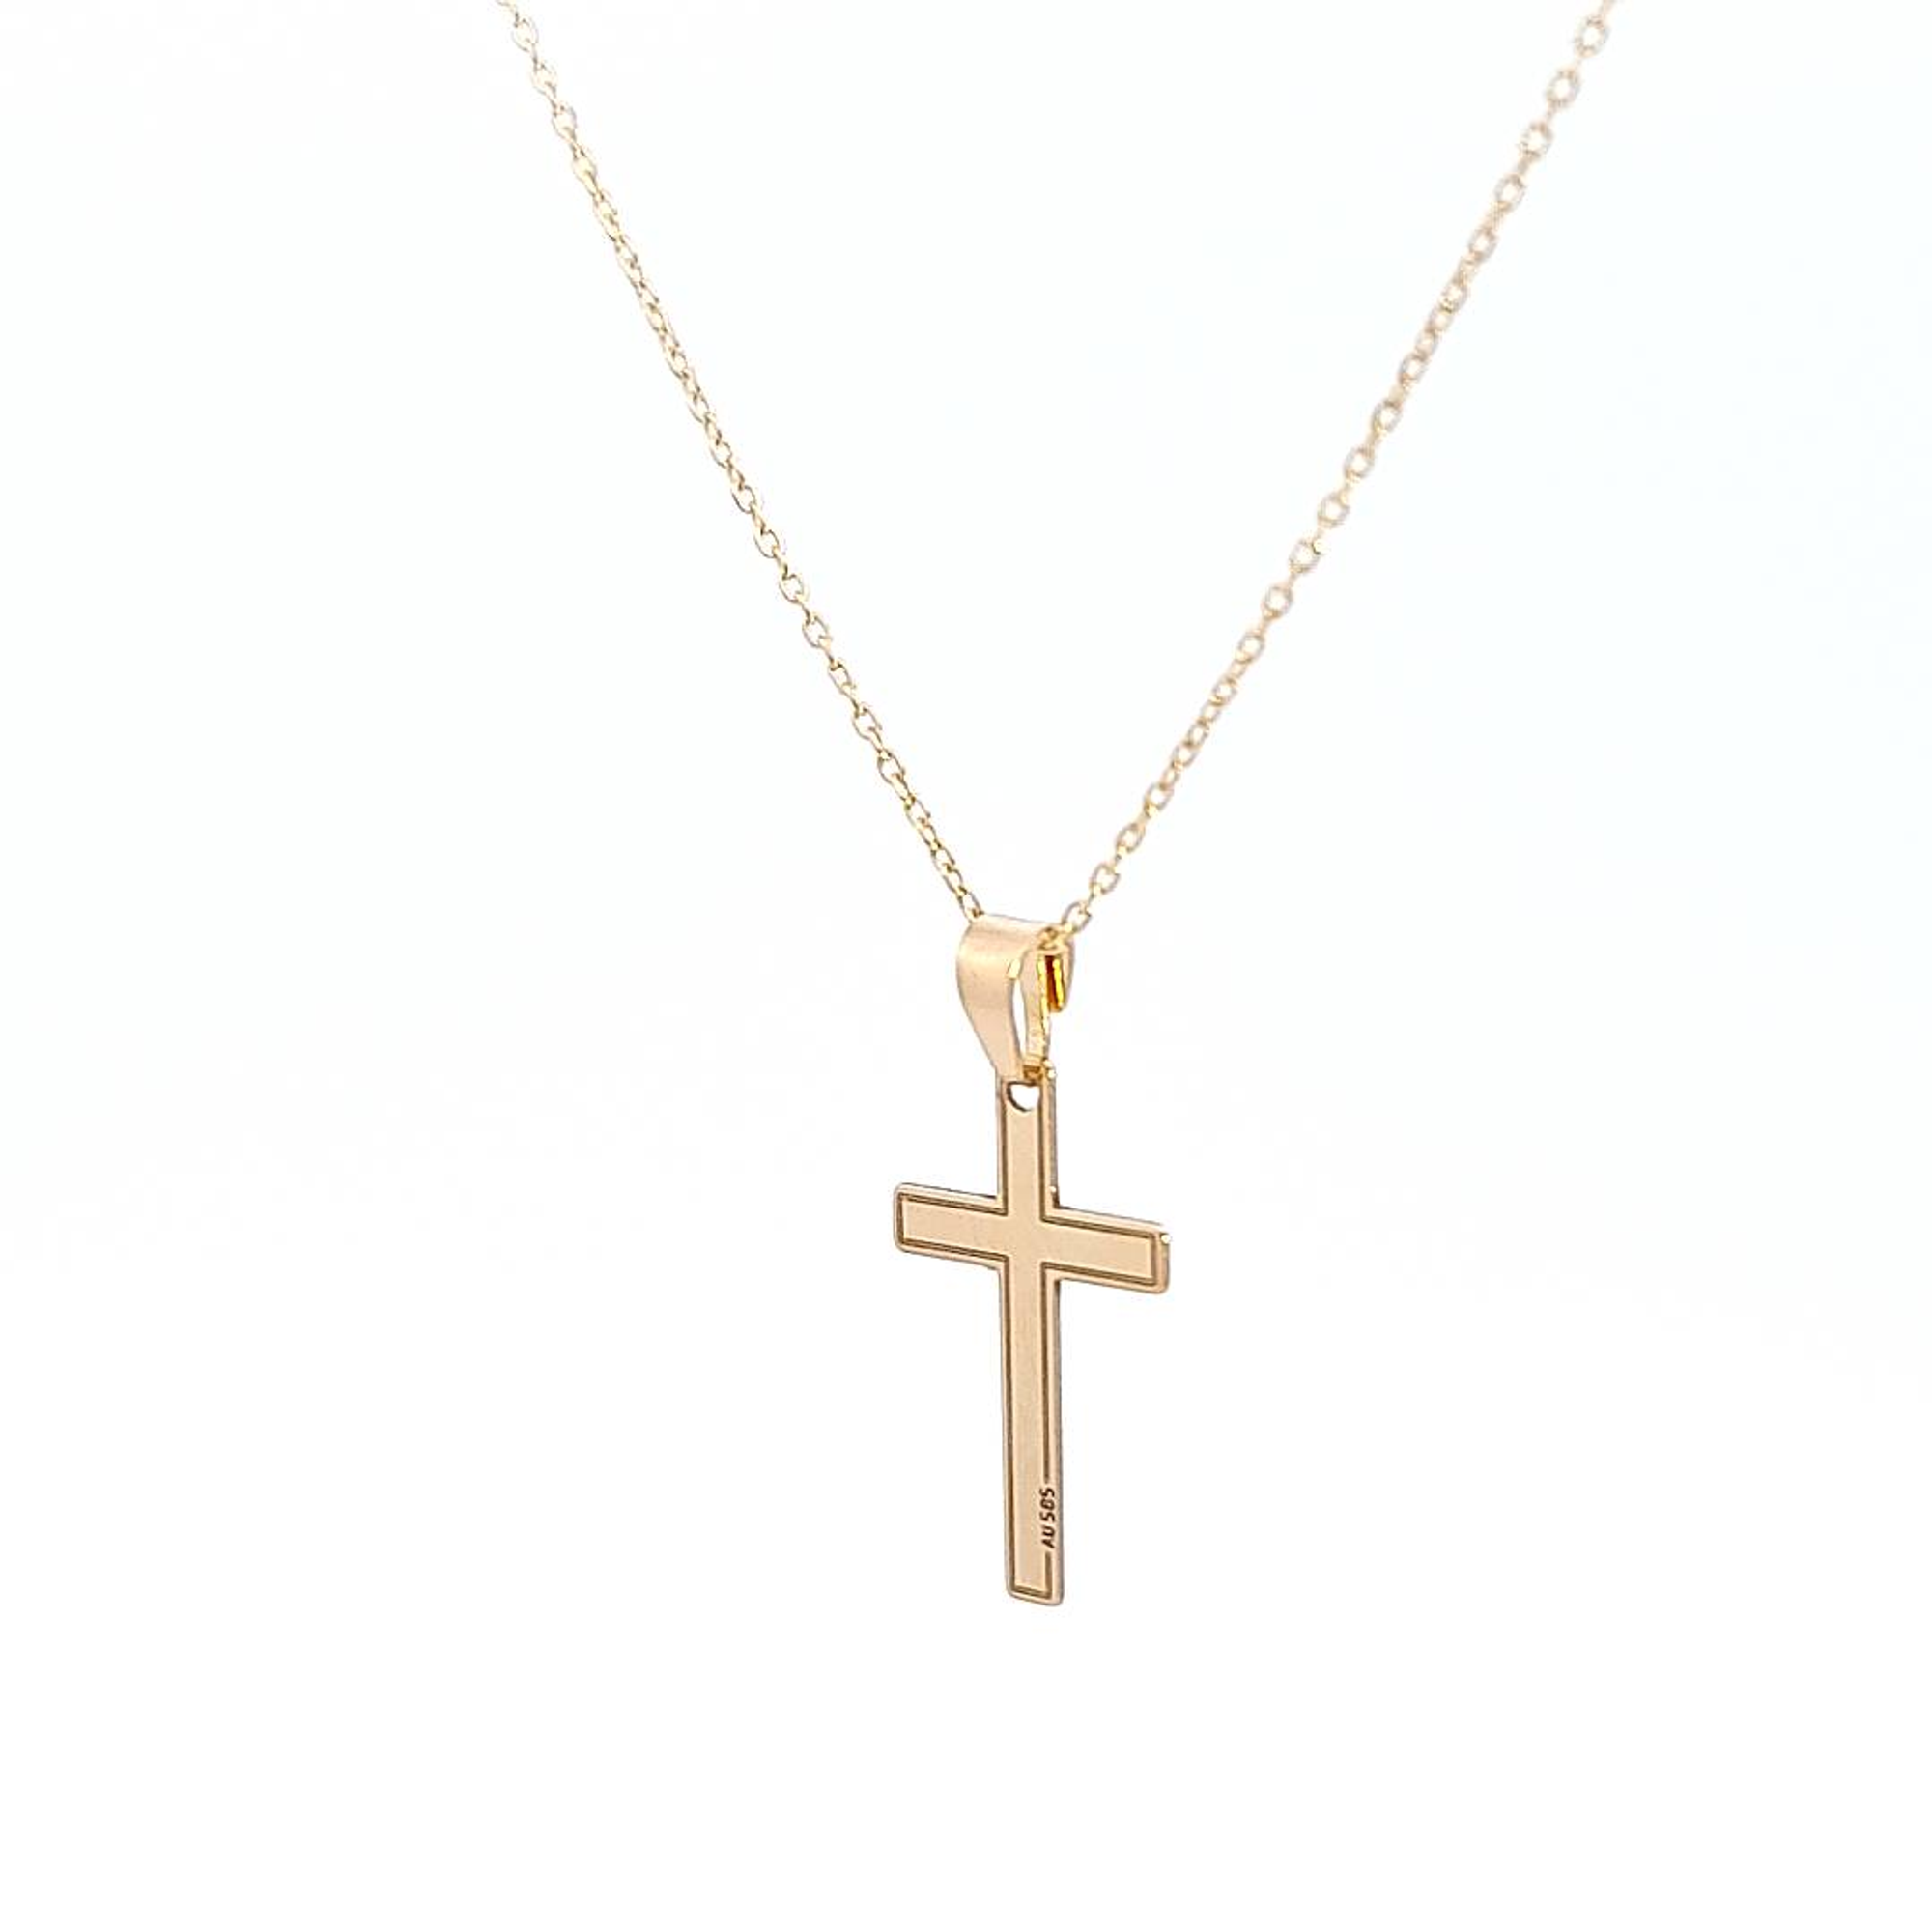 Faith's 14k Gold Cross Necklace - Alternate side view showcasing the reflective sheen on the 14k gold cross surface